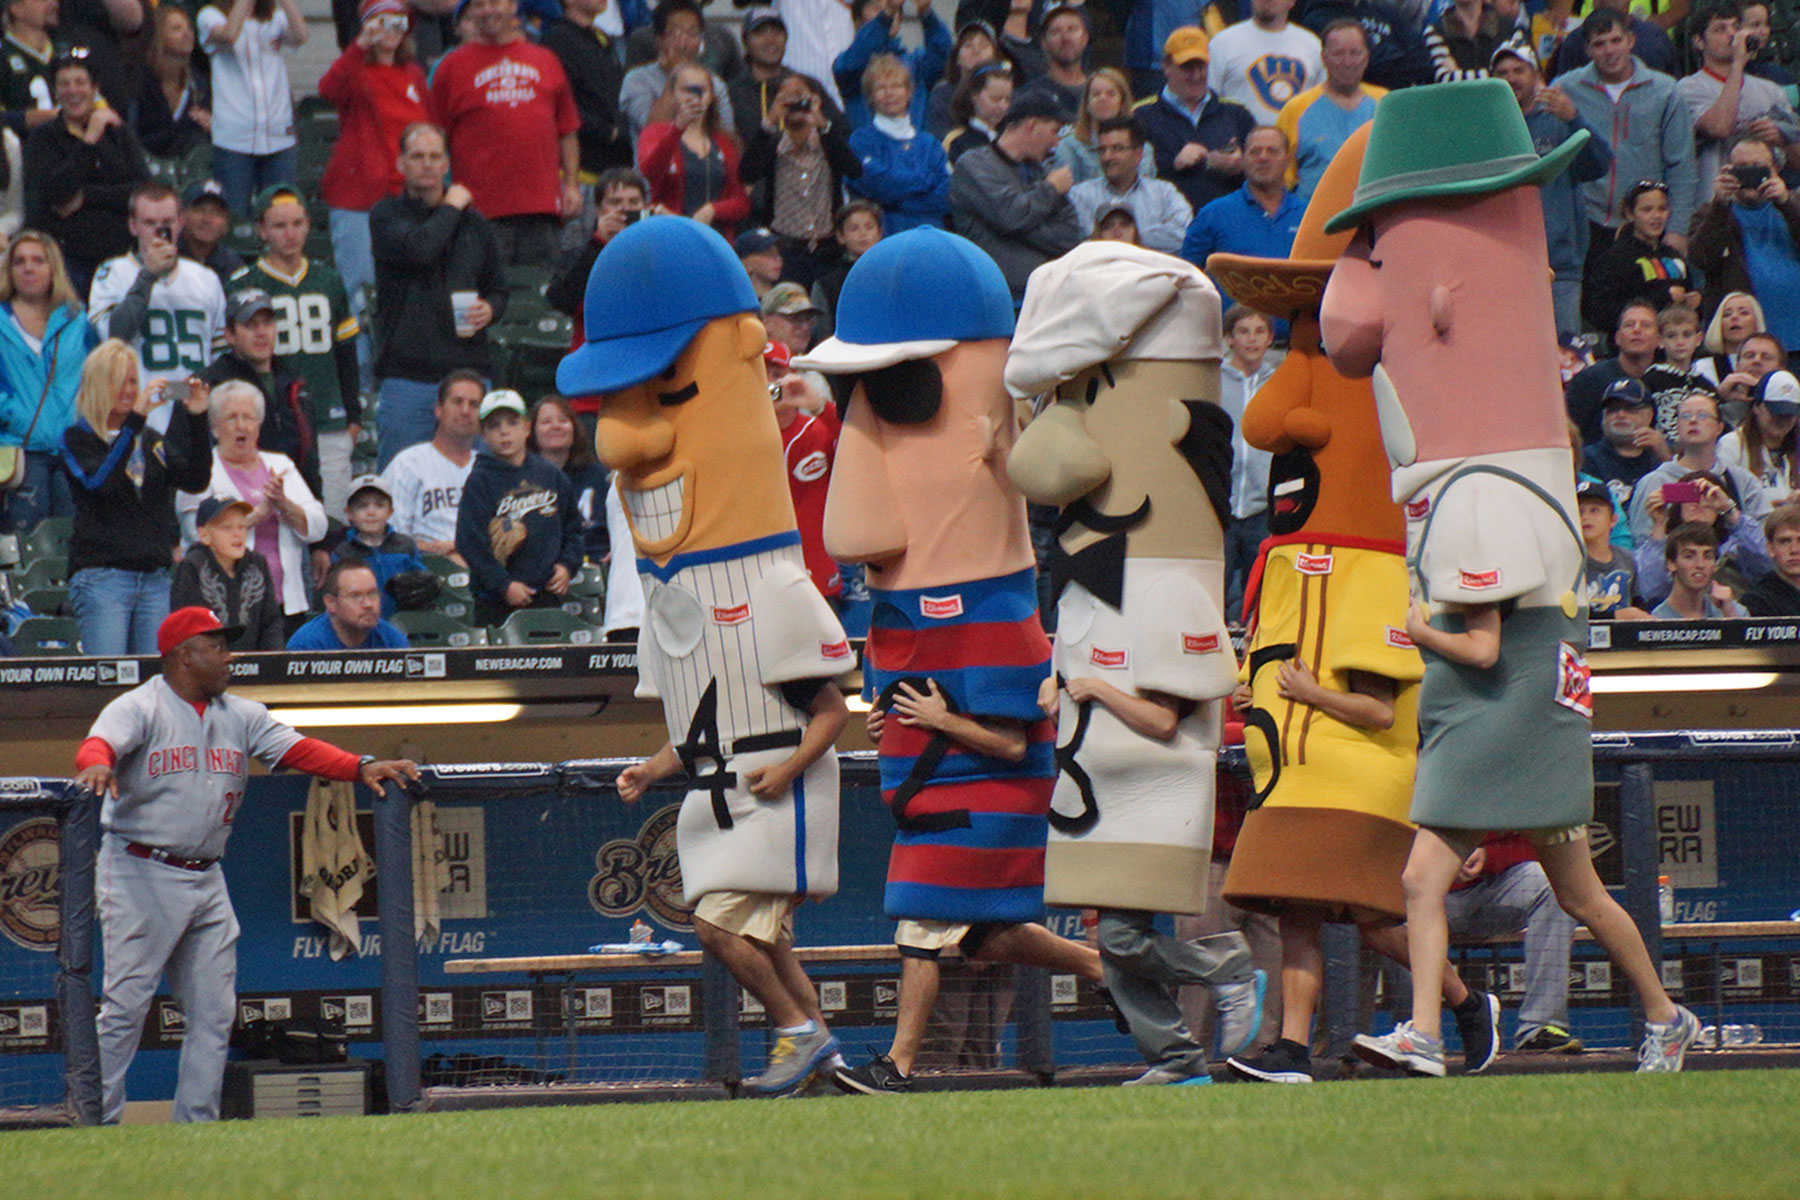 Milwaukee's sausages inspire other mascot races - Page 2 - ESPN